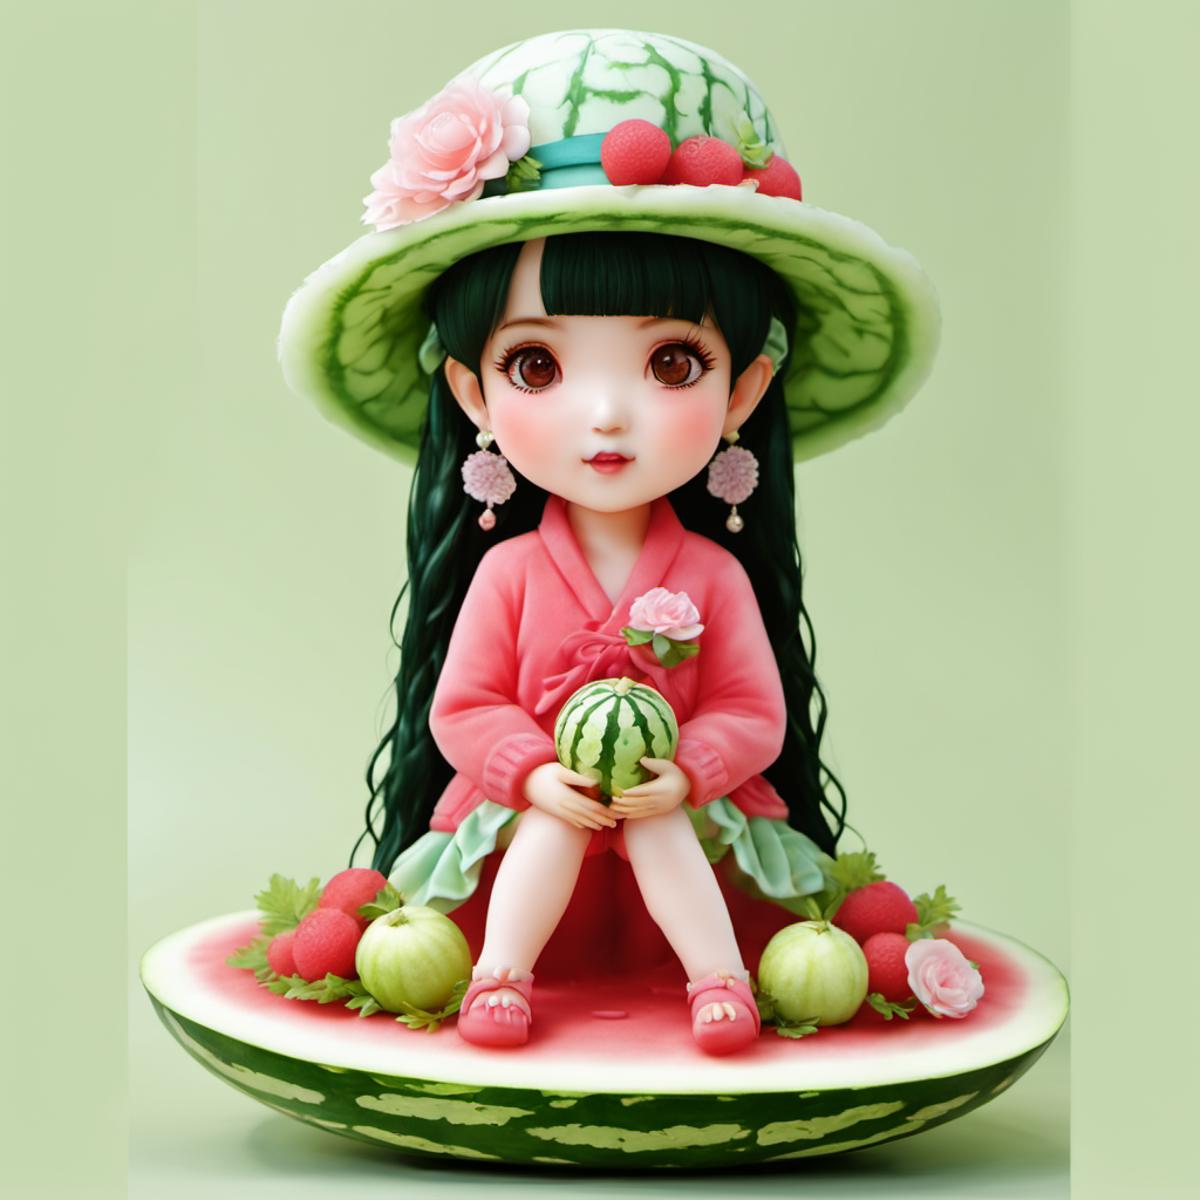 watermeloncarvingSDXL image by chirenshuomeng